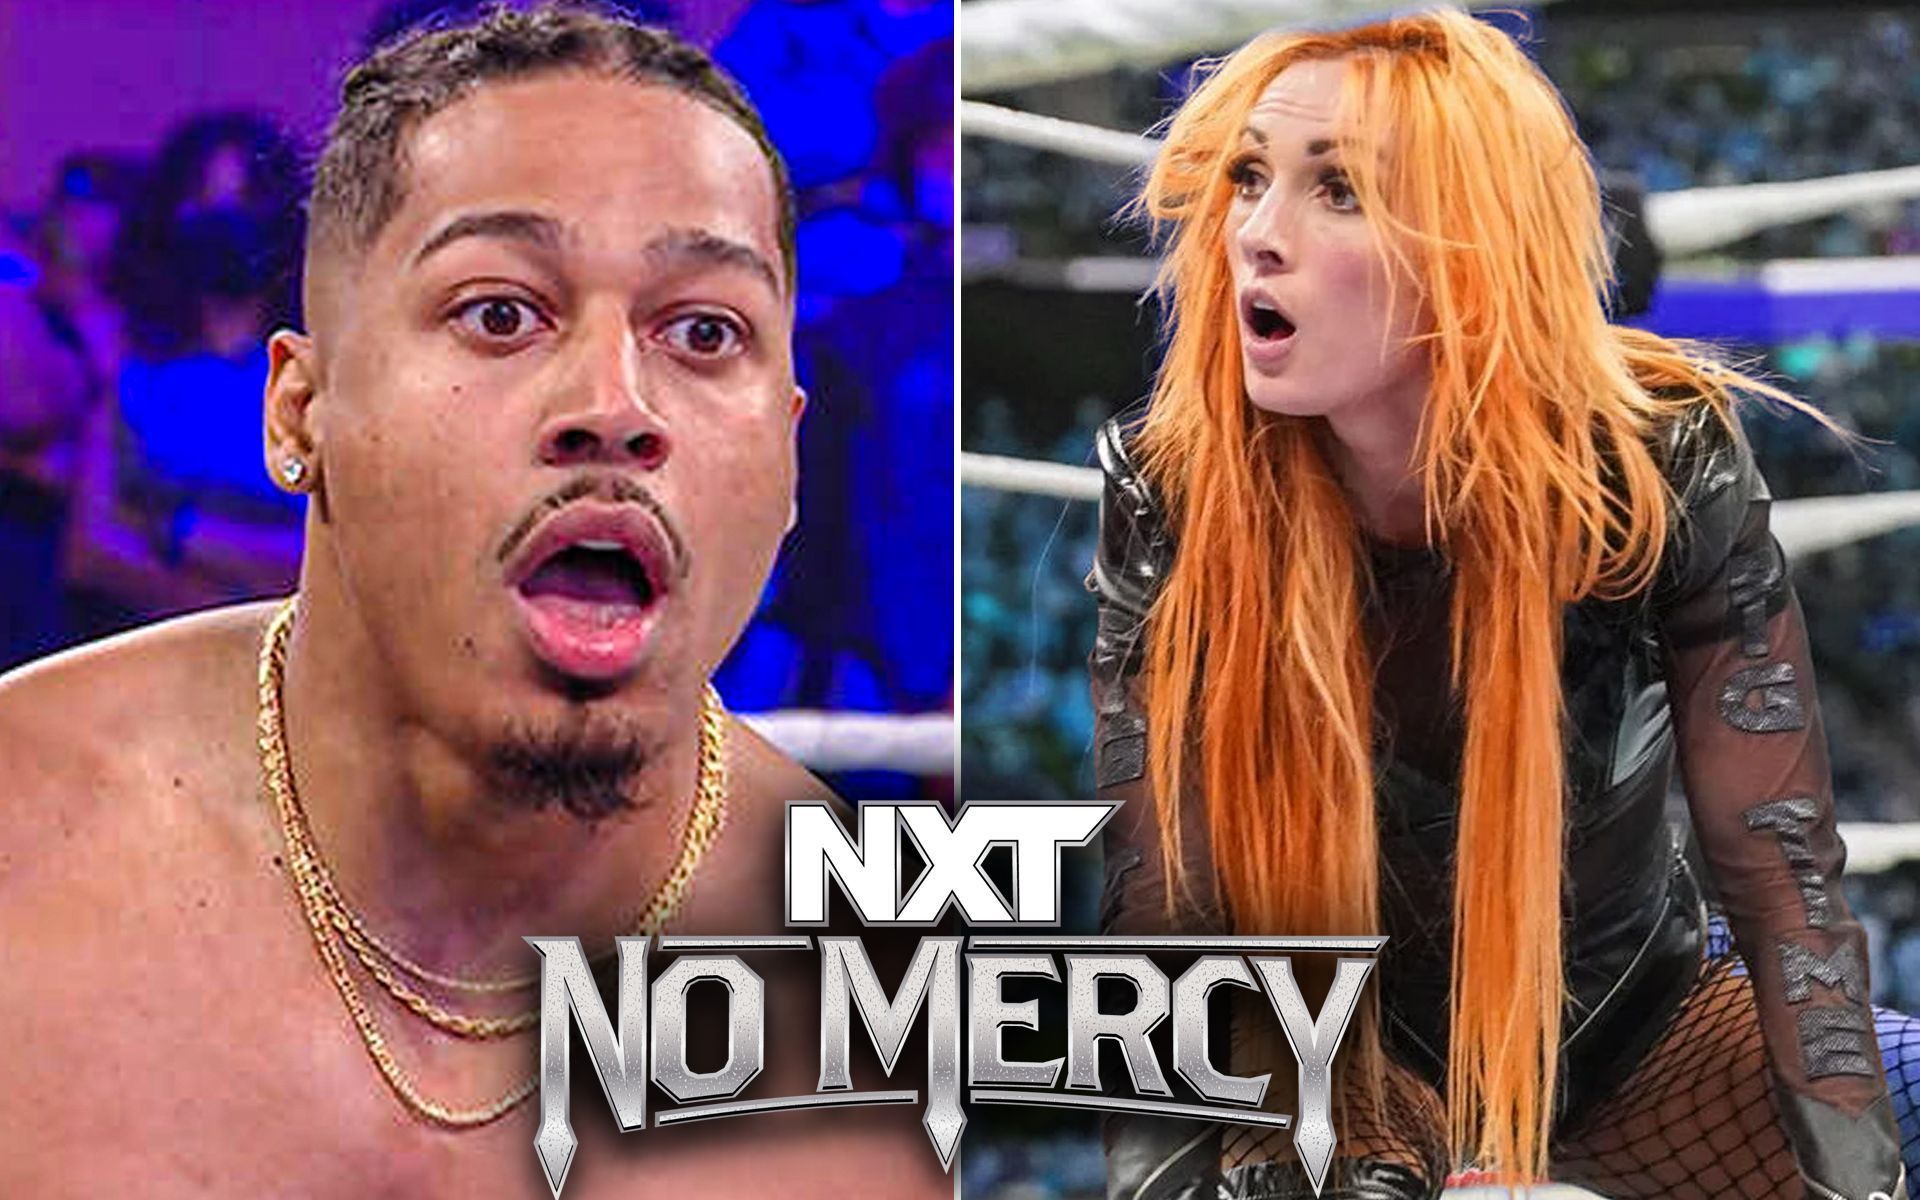 NXT No Mercy 2023 is set to take place on Saturday, September 30, 2023